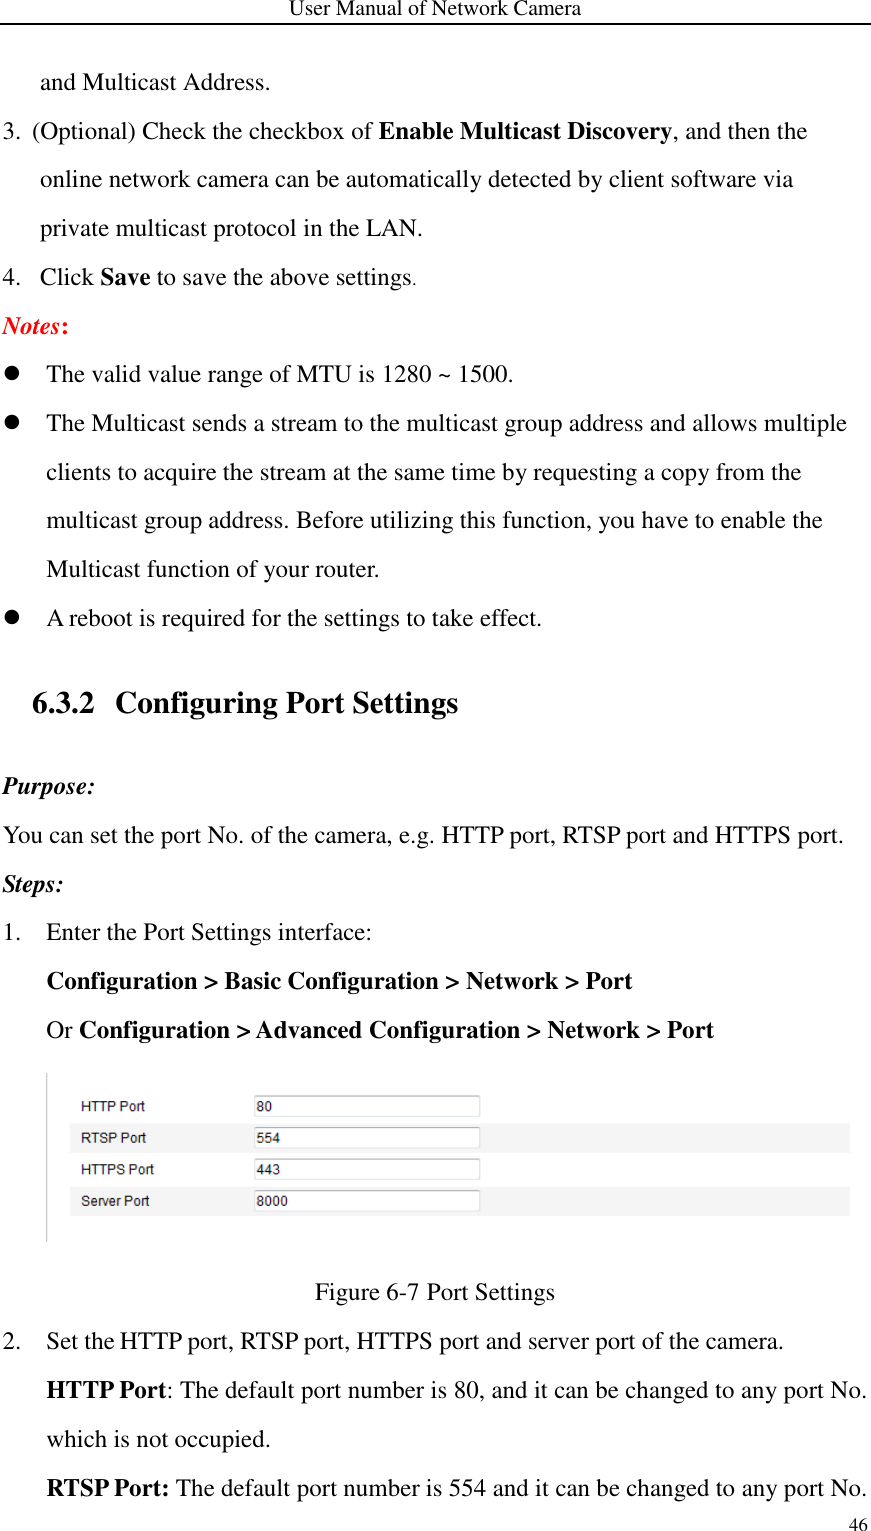 User Manual of Network Camera 46  and Multicast Address. 3. (Optional) Check the checkbox of Enable Multicast Discovery, and then the online network camera can be automatically detected by client software via private multicast protocol in the LAN. 4. Click Save to save the above settings. Notes:    The valid value range of MTU is 1280 ~ 1500.    The Multicast sends a stream to the multicast group address and allows multiple clients to acquire the stream at the same time by requesting a copy from the multicast group address. Before utilizing this function, you have to enable the Multicast function of your router.  A reboot is required for the settings to take effect.  6.3.2 Configuring Port Settings Purpose: You can set the port No. of the camera, e.g. HTTP port, RTSP port and HTTPS port. Steps:   1. Enter the Port Settings interface: Configuration &gt; Basic Configuration &gt; Network &gt; Port   Or Configuration &gt; Advanced Configuration &gt; Network &gt; Port  Figure 6-7 Port Settings 2. Set the HTTP port, RTSP port, HTTPS port and server port of the camera. HTTP Port: The default port number is 80, and it can be changed to any port No. which is not occupied. RTSP Port: The default port number is 554 and it can be changed to any port No. 